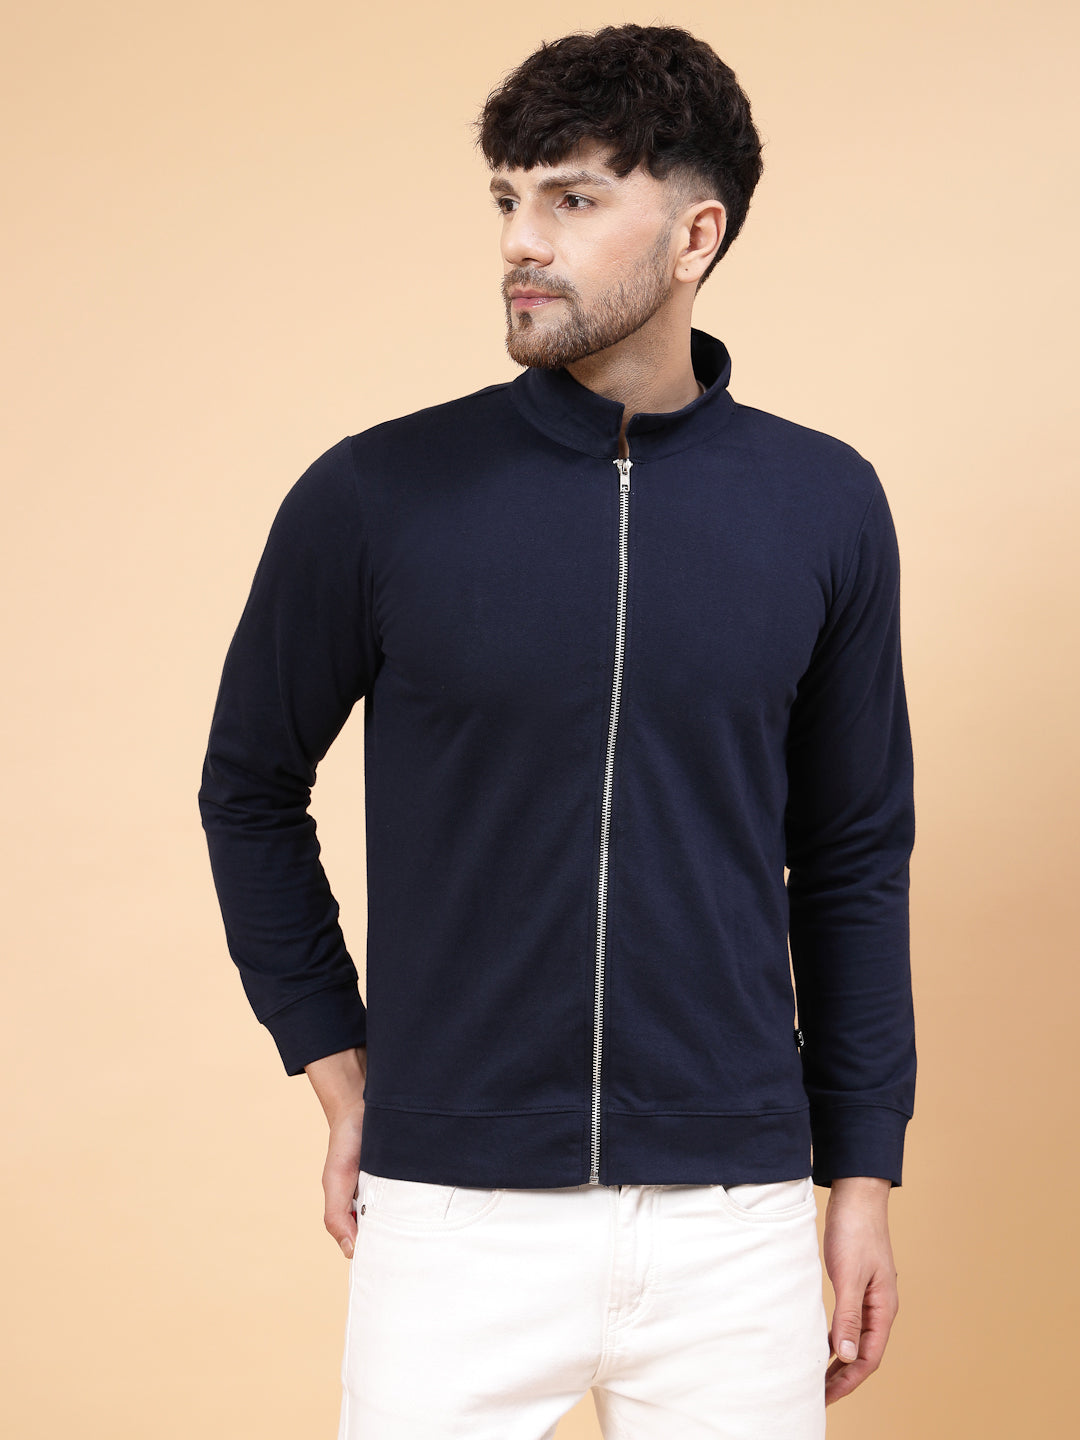 Stylish And Fashionable Comfortable Slim Fit Full Sleeve Mens Denim Jacket  Gender: Boy at Best Price in Ghaziabad | Ok Good Choice Garment